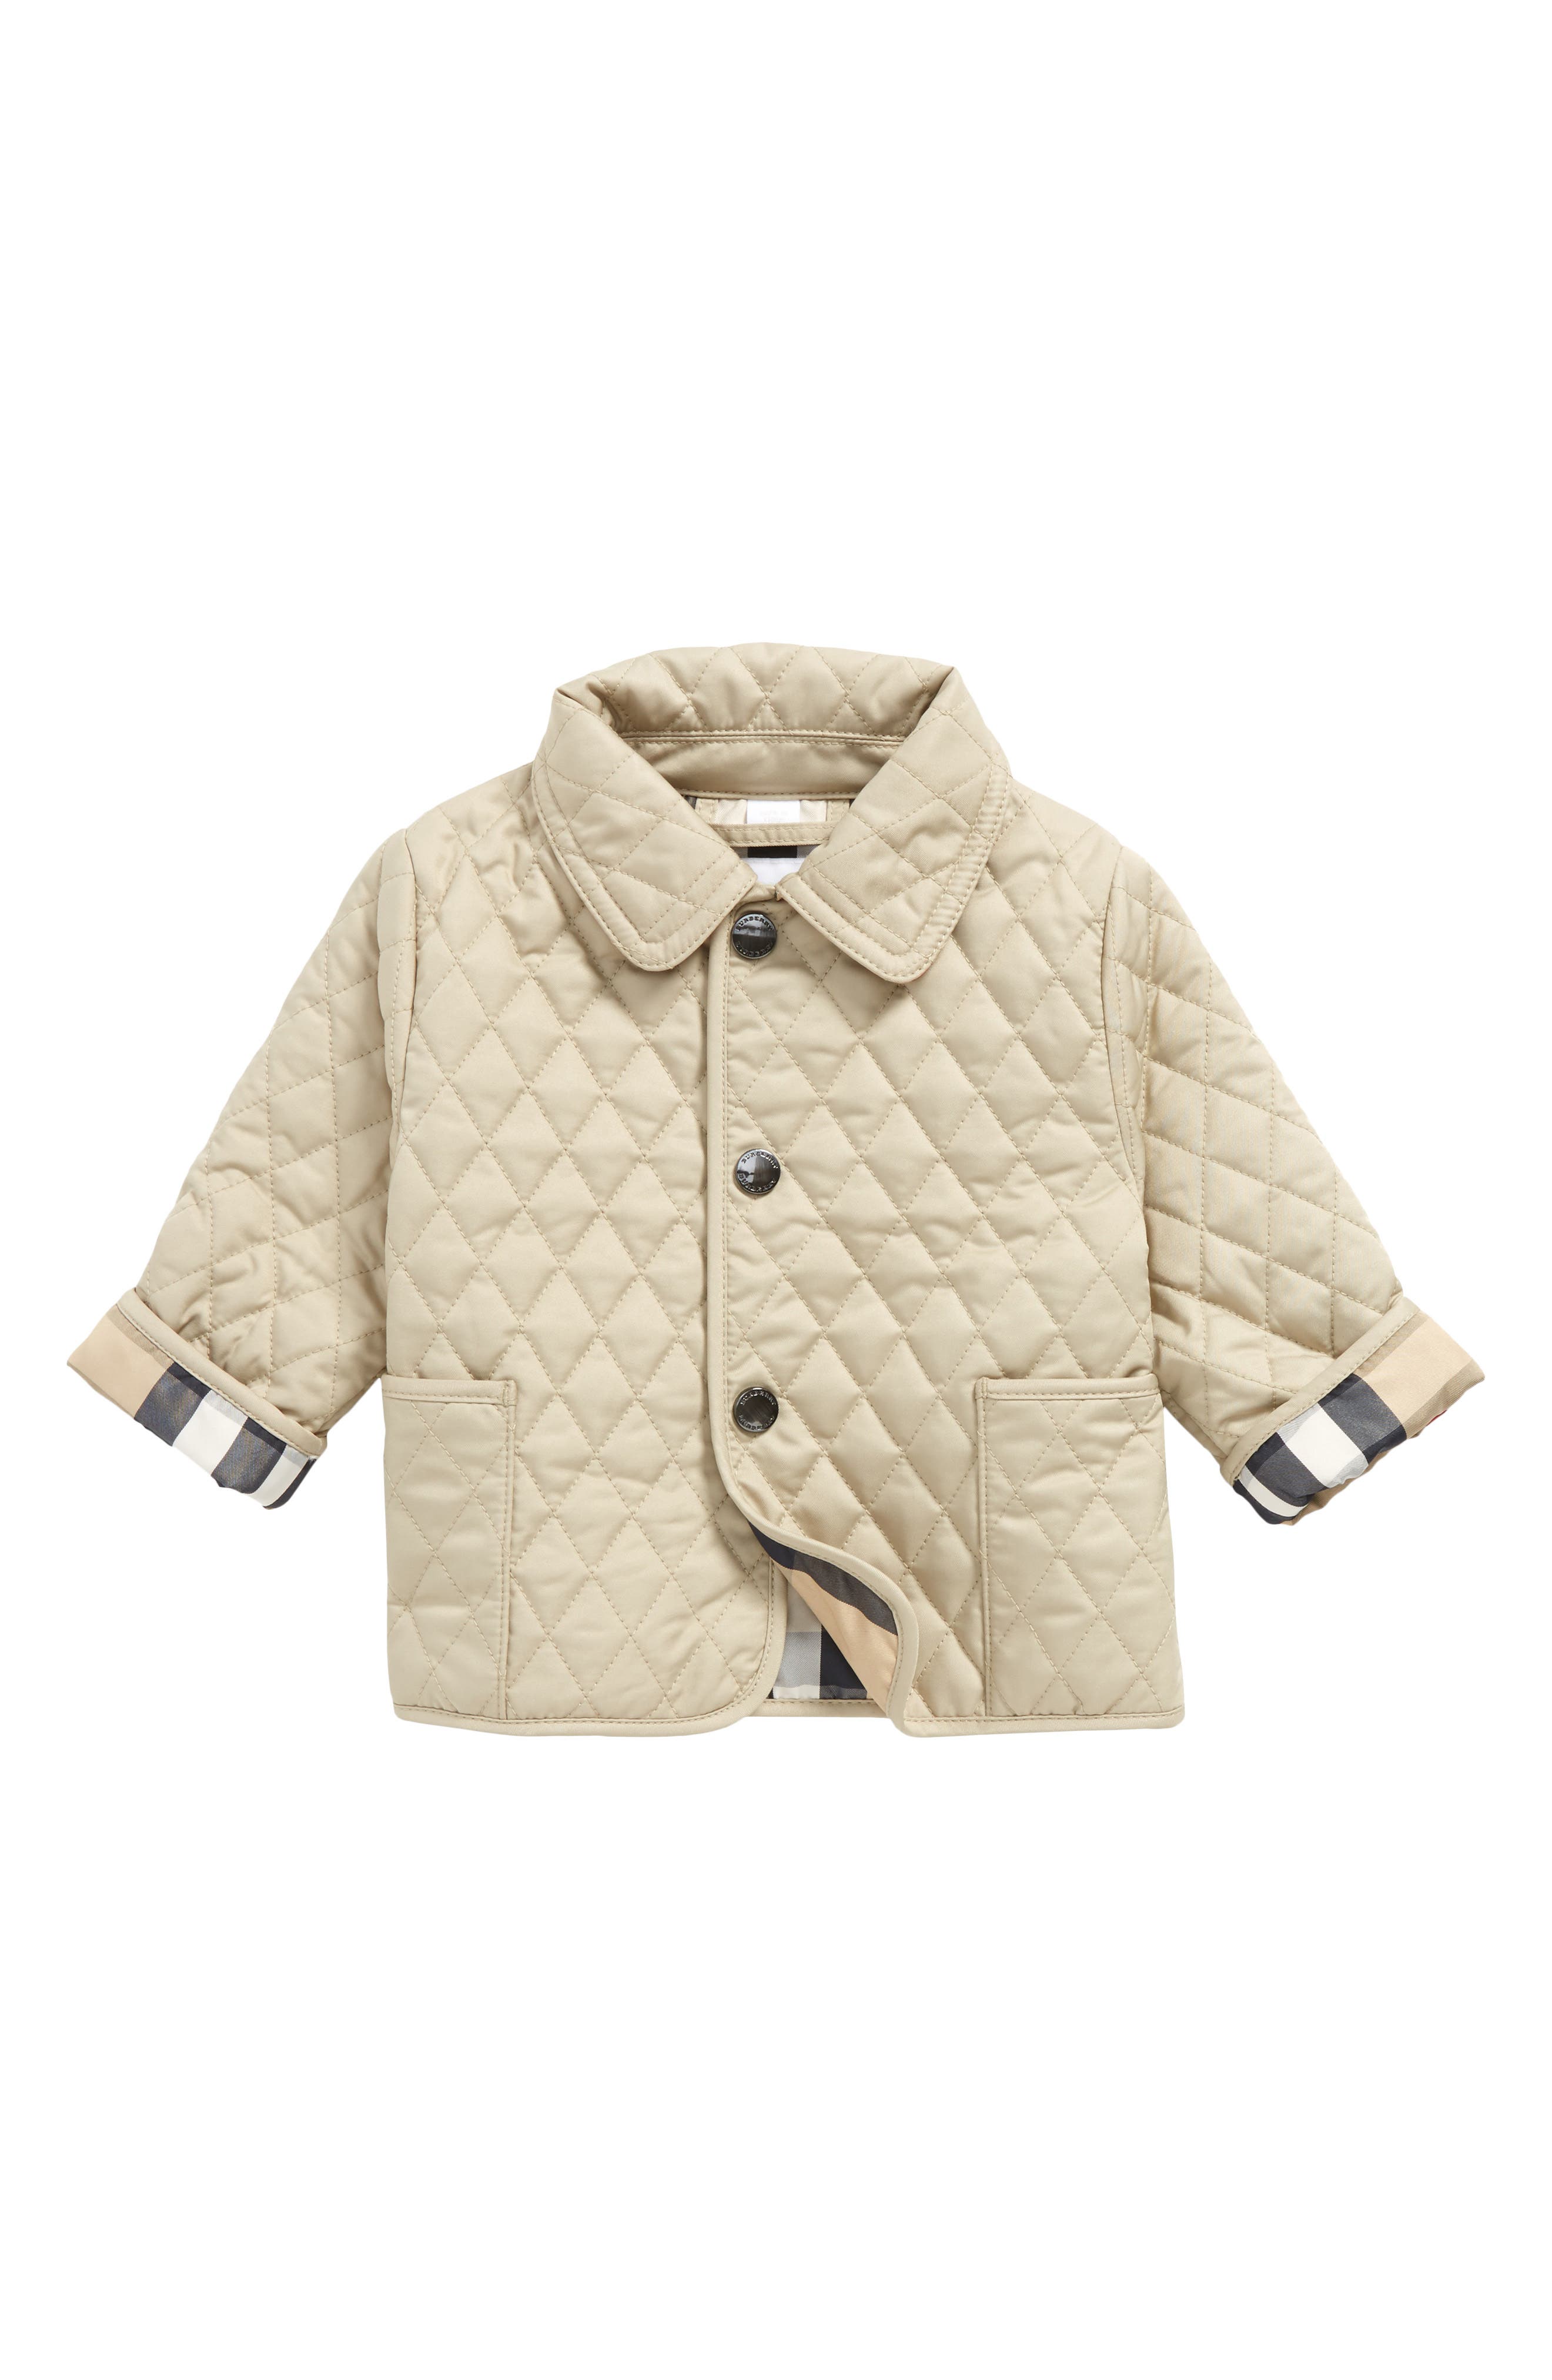 burberry quilted jacket womens nordstrom